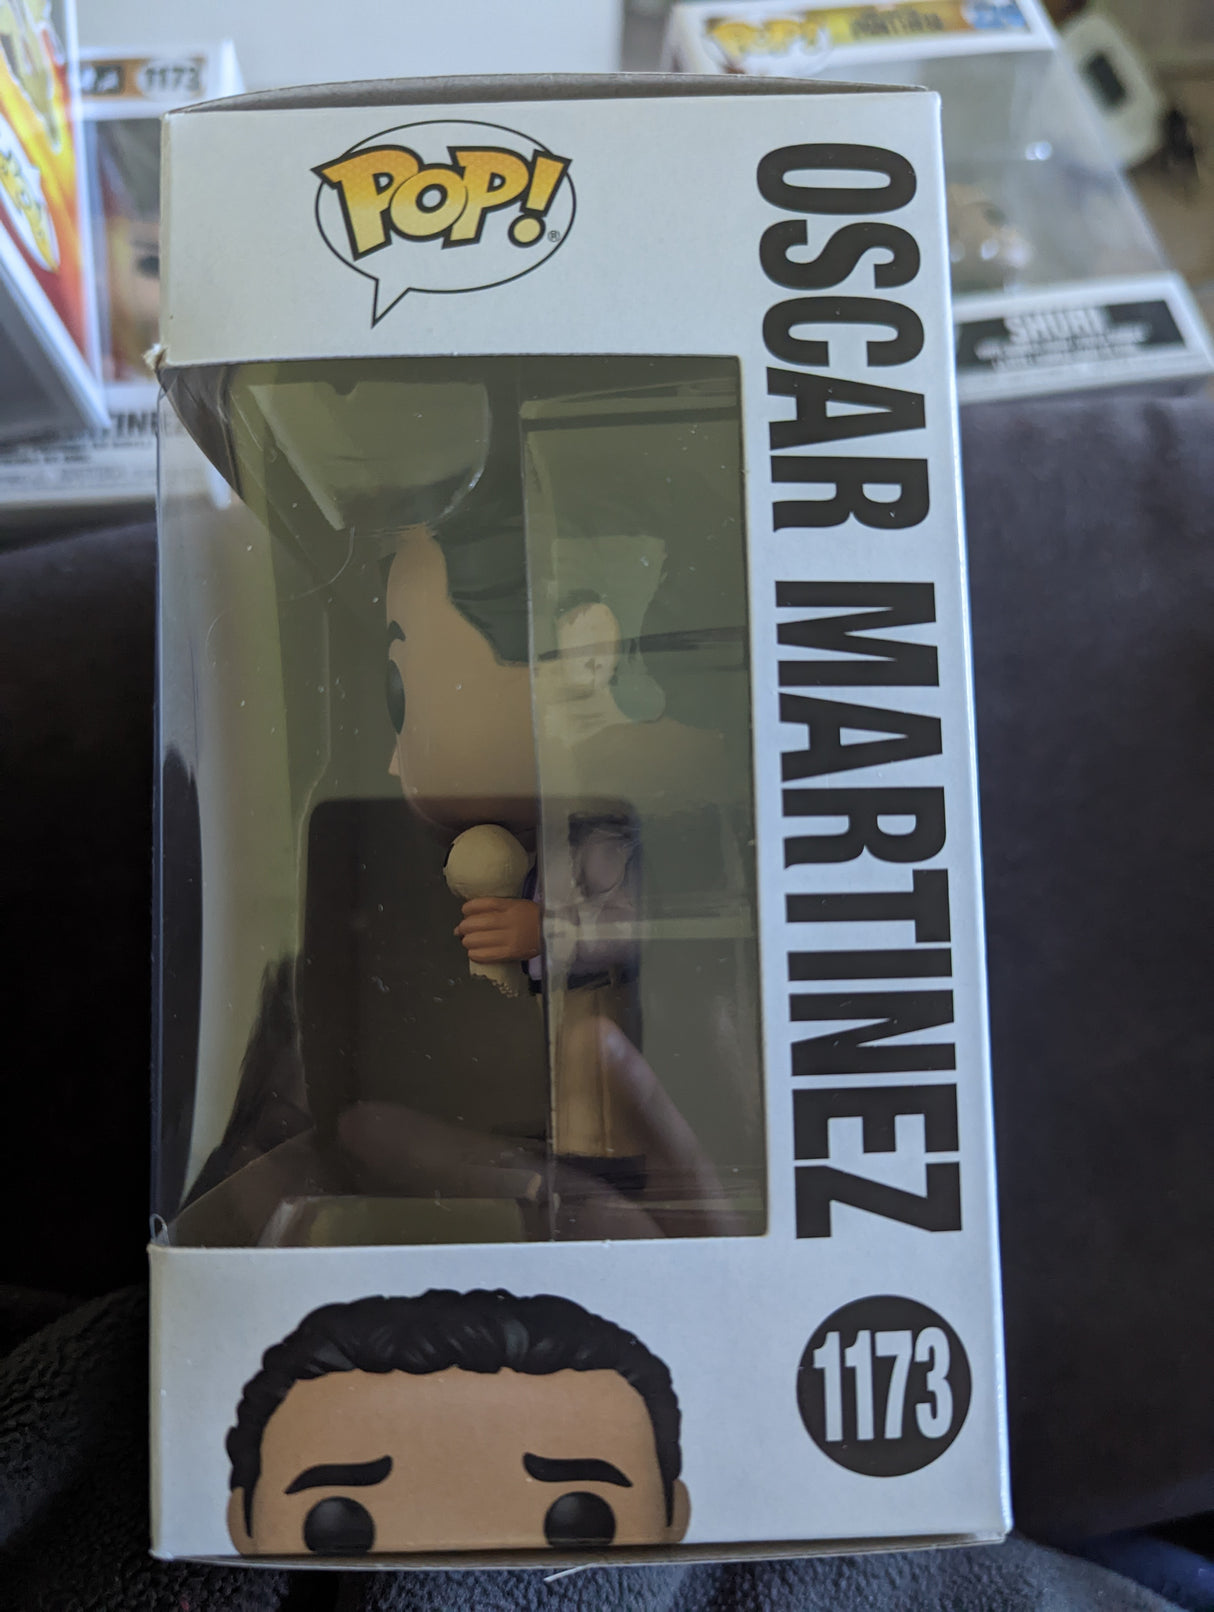 Damaged Box Funko Pop Television - The Office - Oscar Martinez with Scarecrow Doll #1173 (6959442919524)